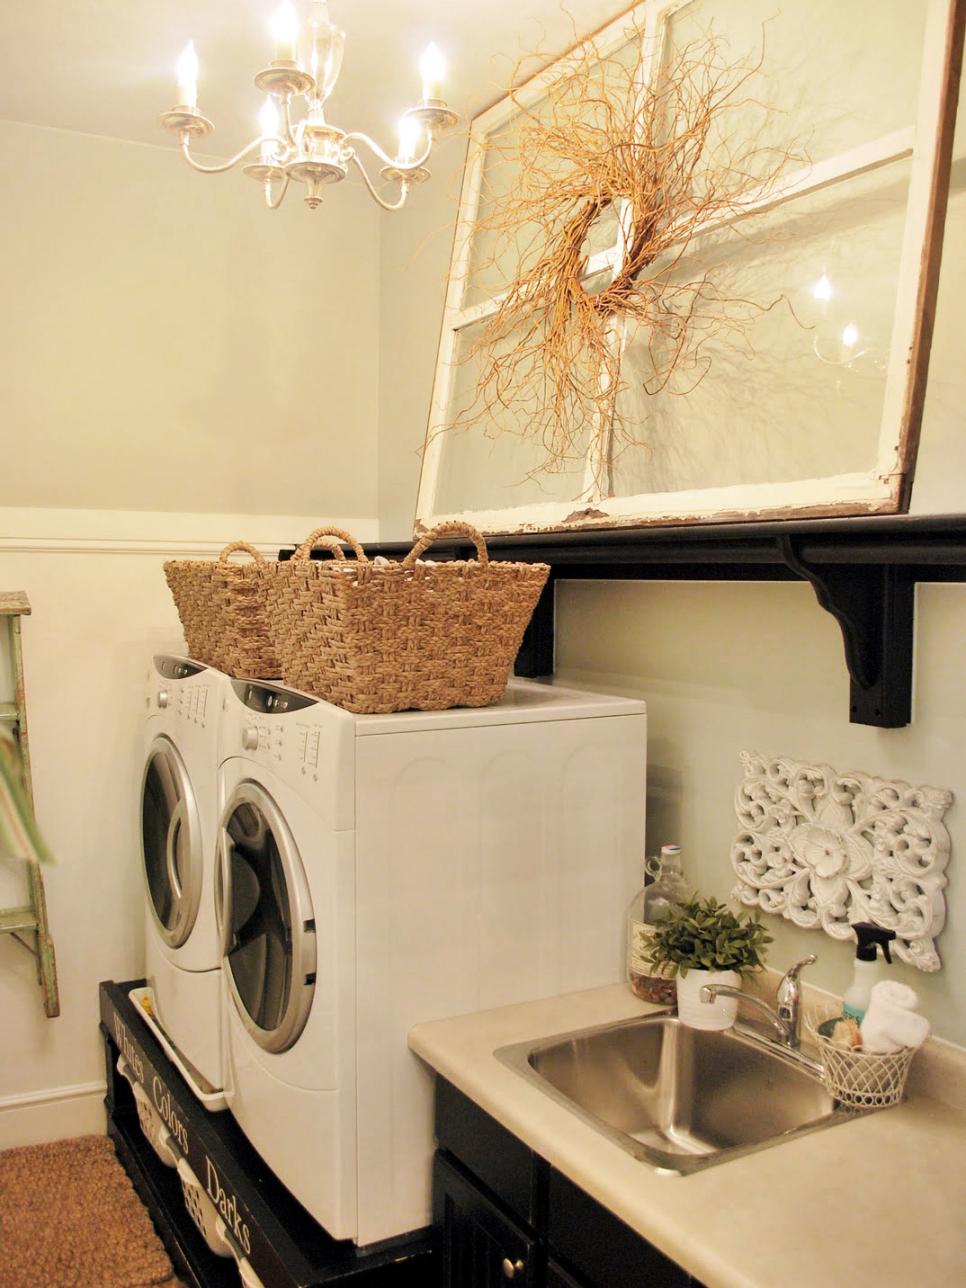  Laundry Room Decorating Ideas with Best Design